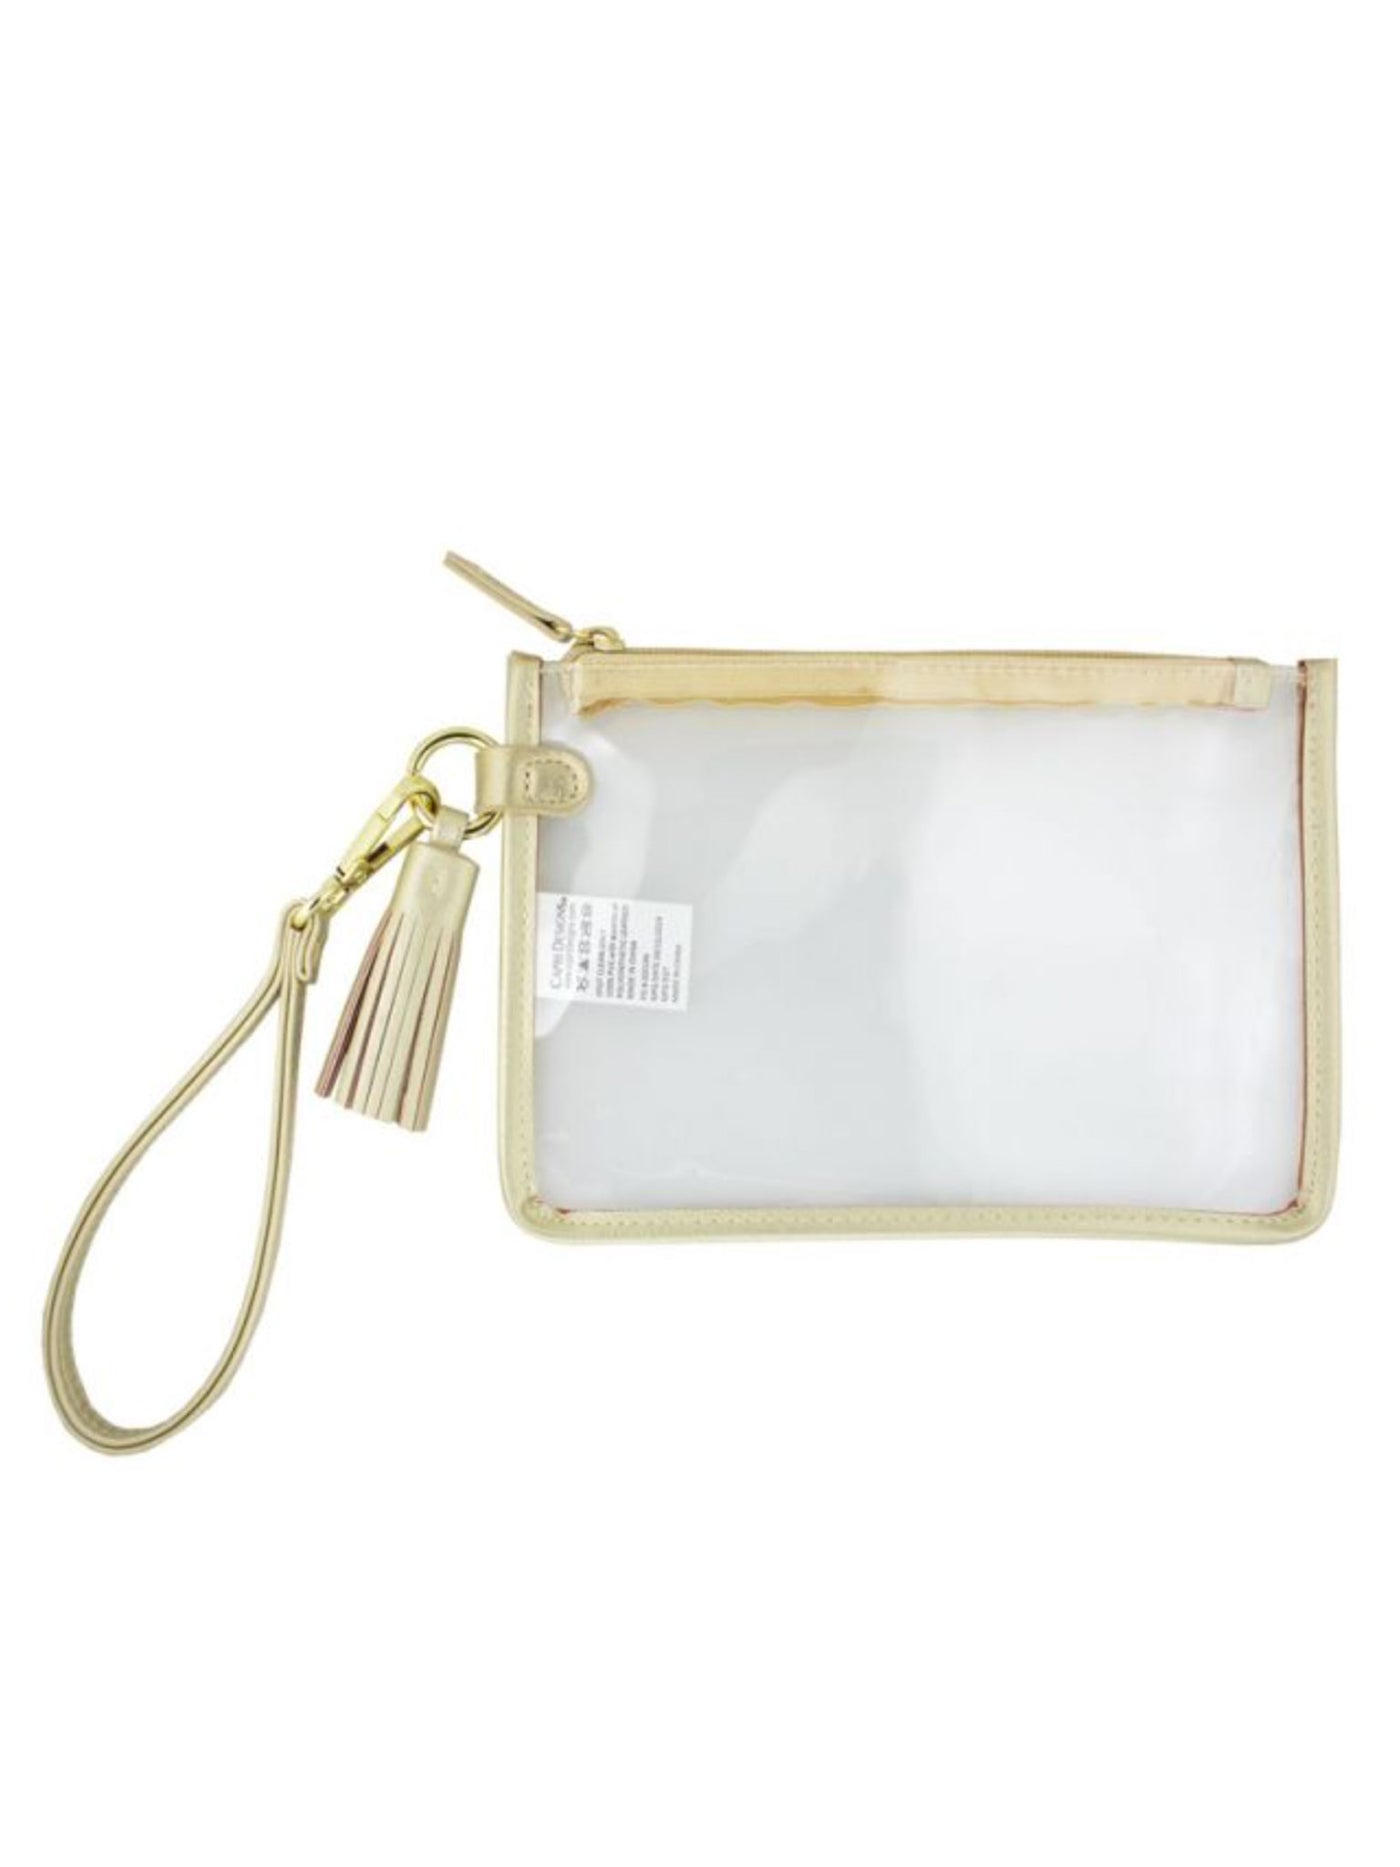 Clear Gold Wristlet